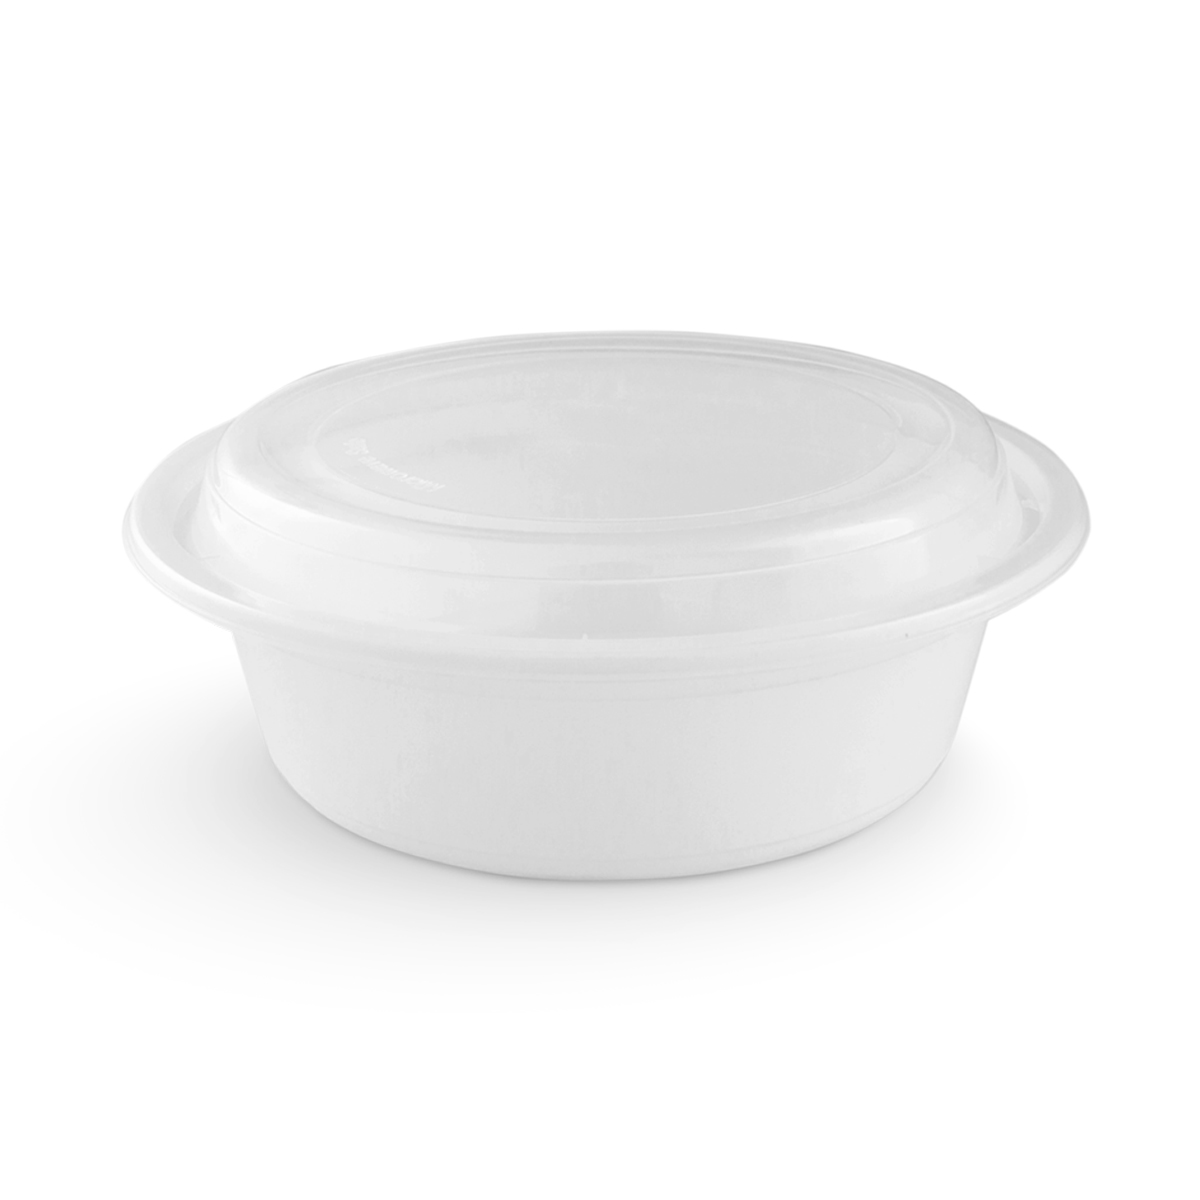 Microwave Containers with Lid (24 oz, Round Shape, White Colour)